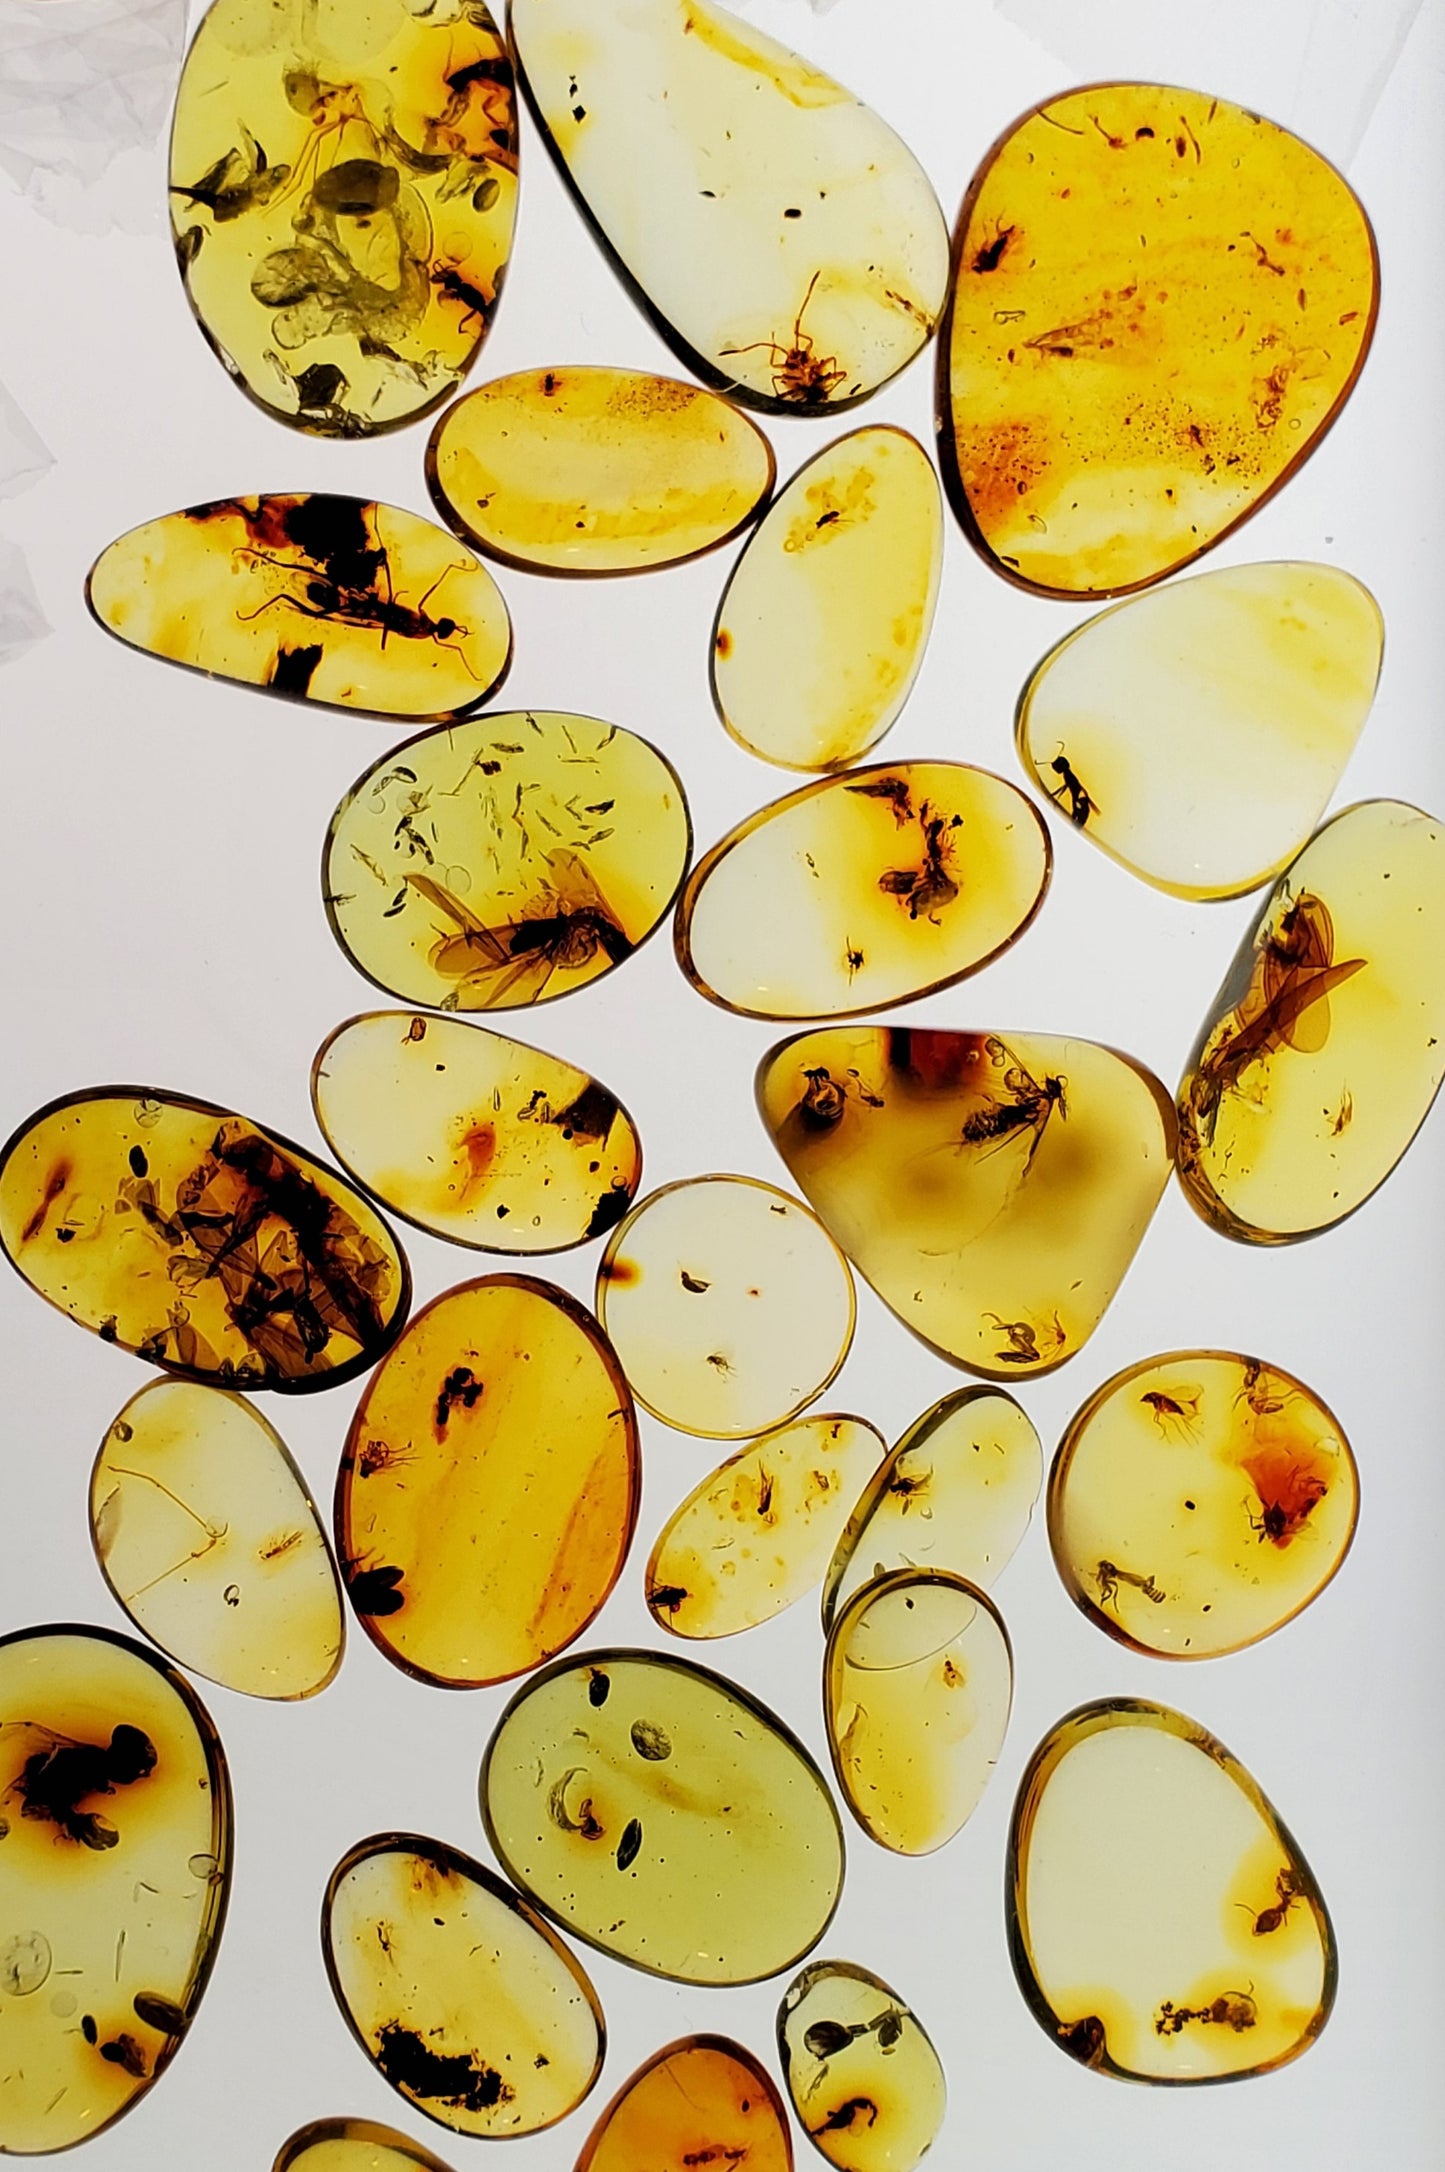 10 Amber Specimens with Insect Inclusions